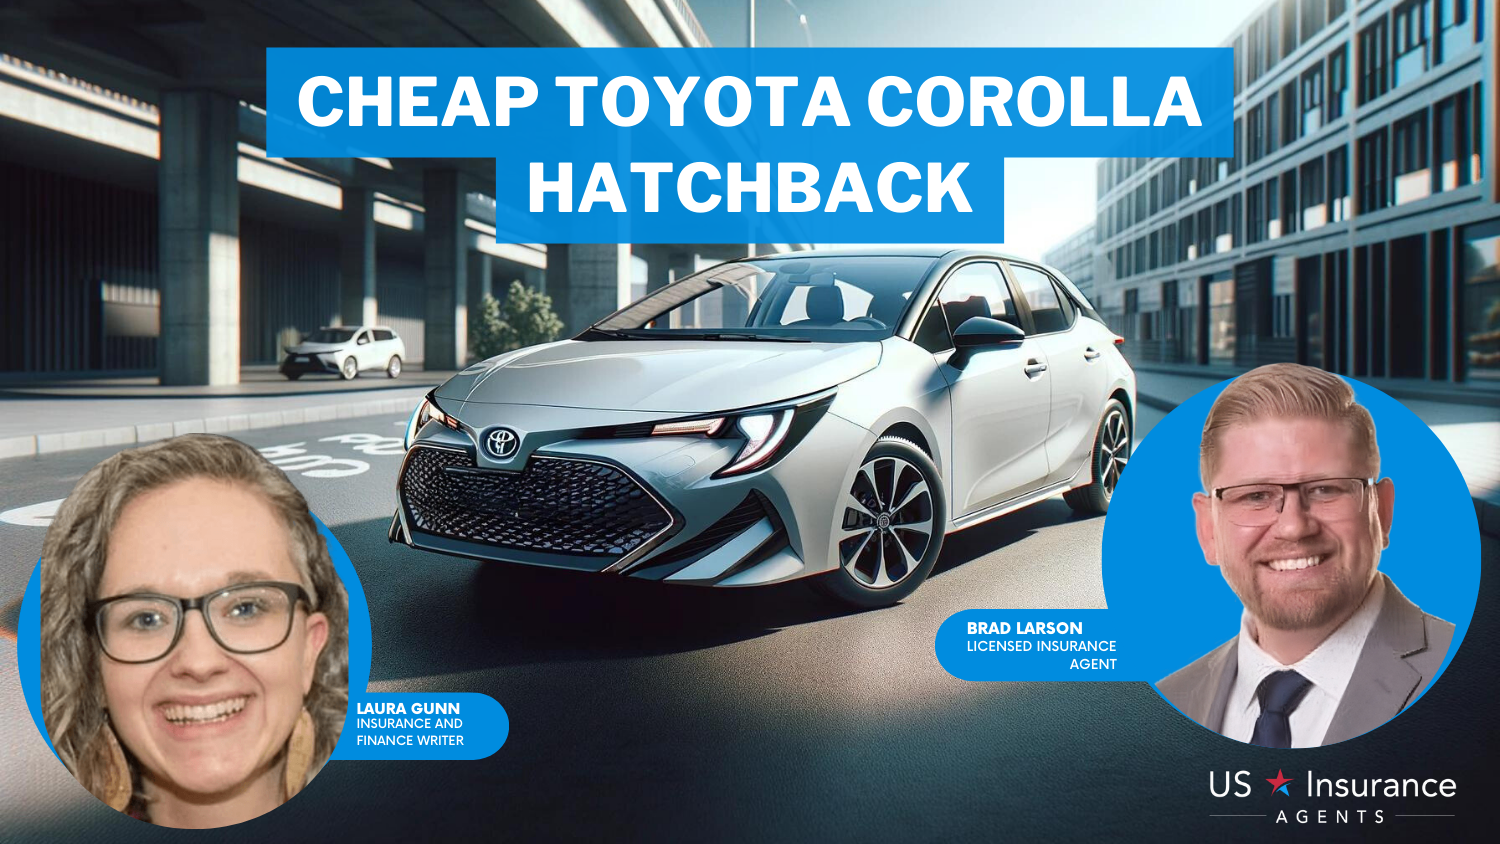 Cheap Toyota Corolla Hatchback Car Insurance: Progressive, Auto-Owners, and Nationwide